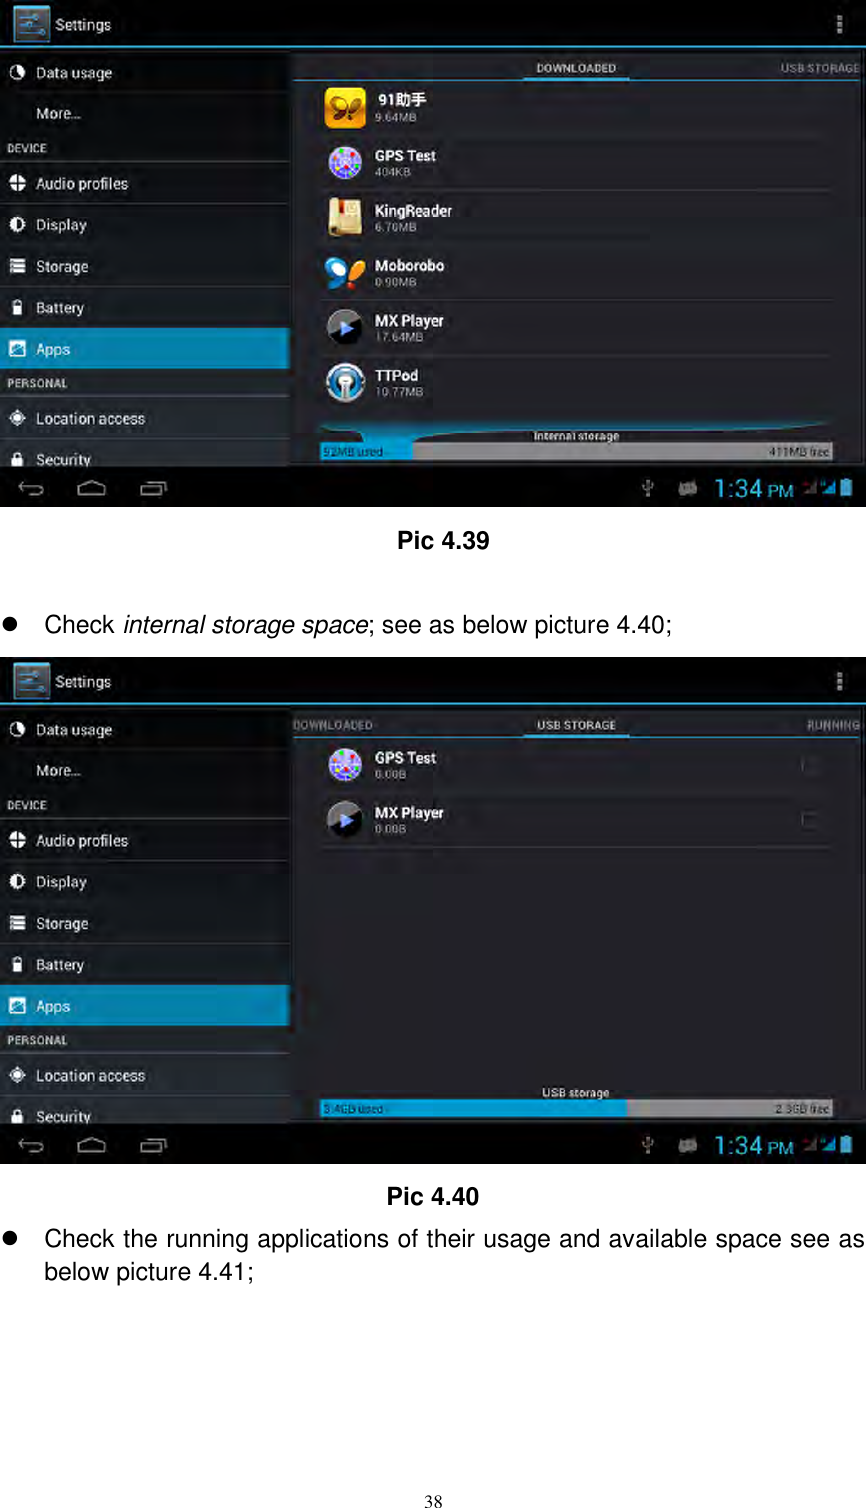      38  Pic 4.39    Check internal storage space; see as below picture 4.40;  Pic 4.40   Check the running applications of their usage and available space see as below picture 4.41; 